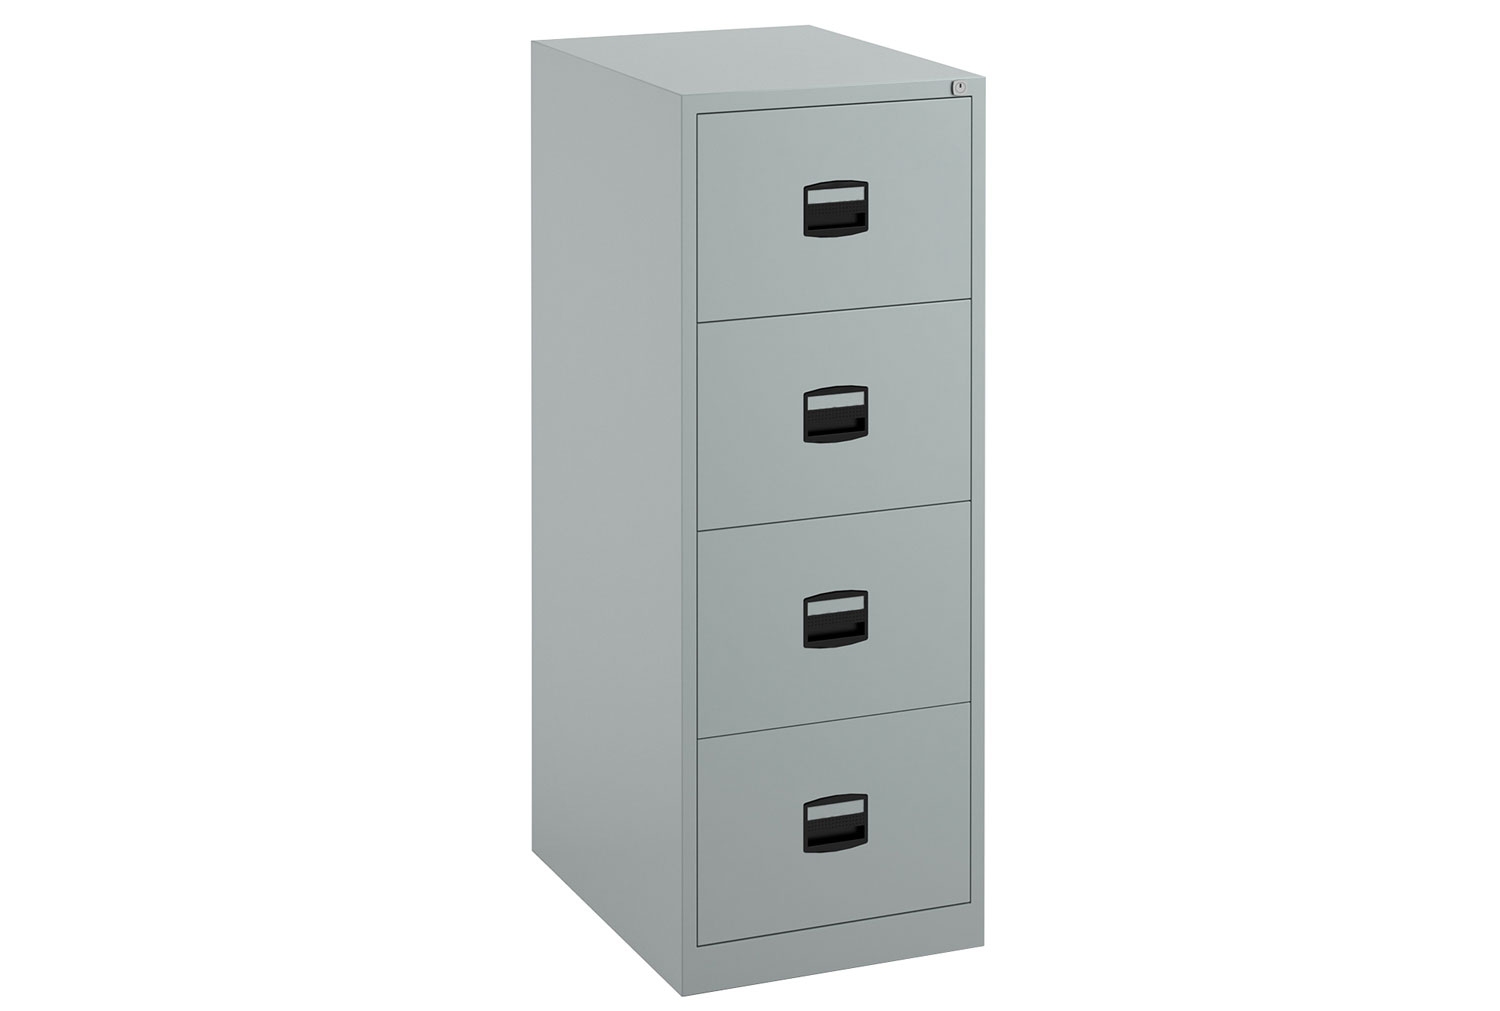 Bisley Economy Office Filing Cabinet (Central Handle), 4 Drawer - 47wx62dx132h (cm), Silver, Fully Installed